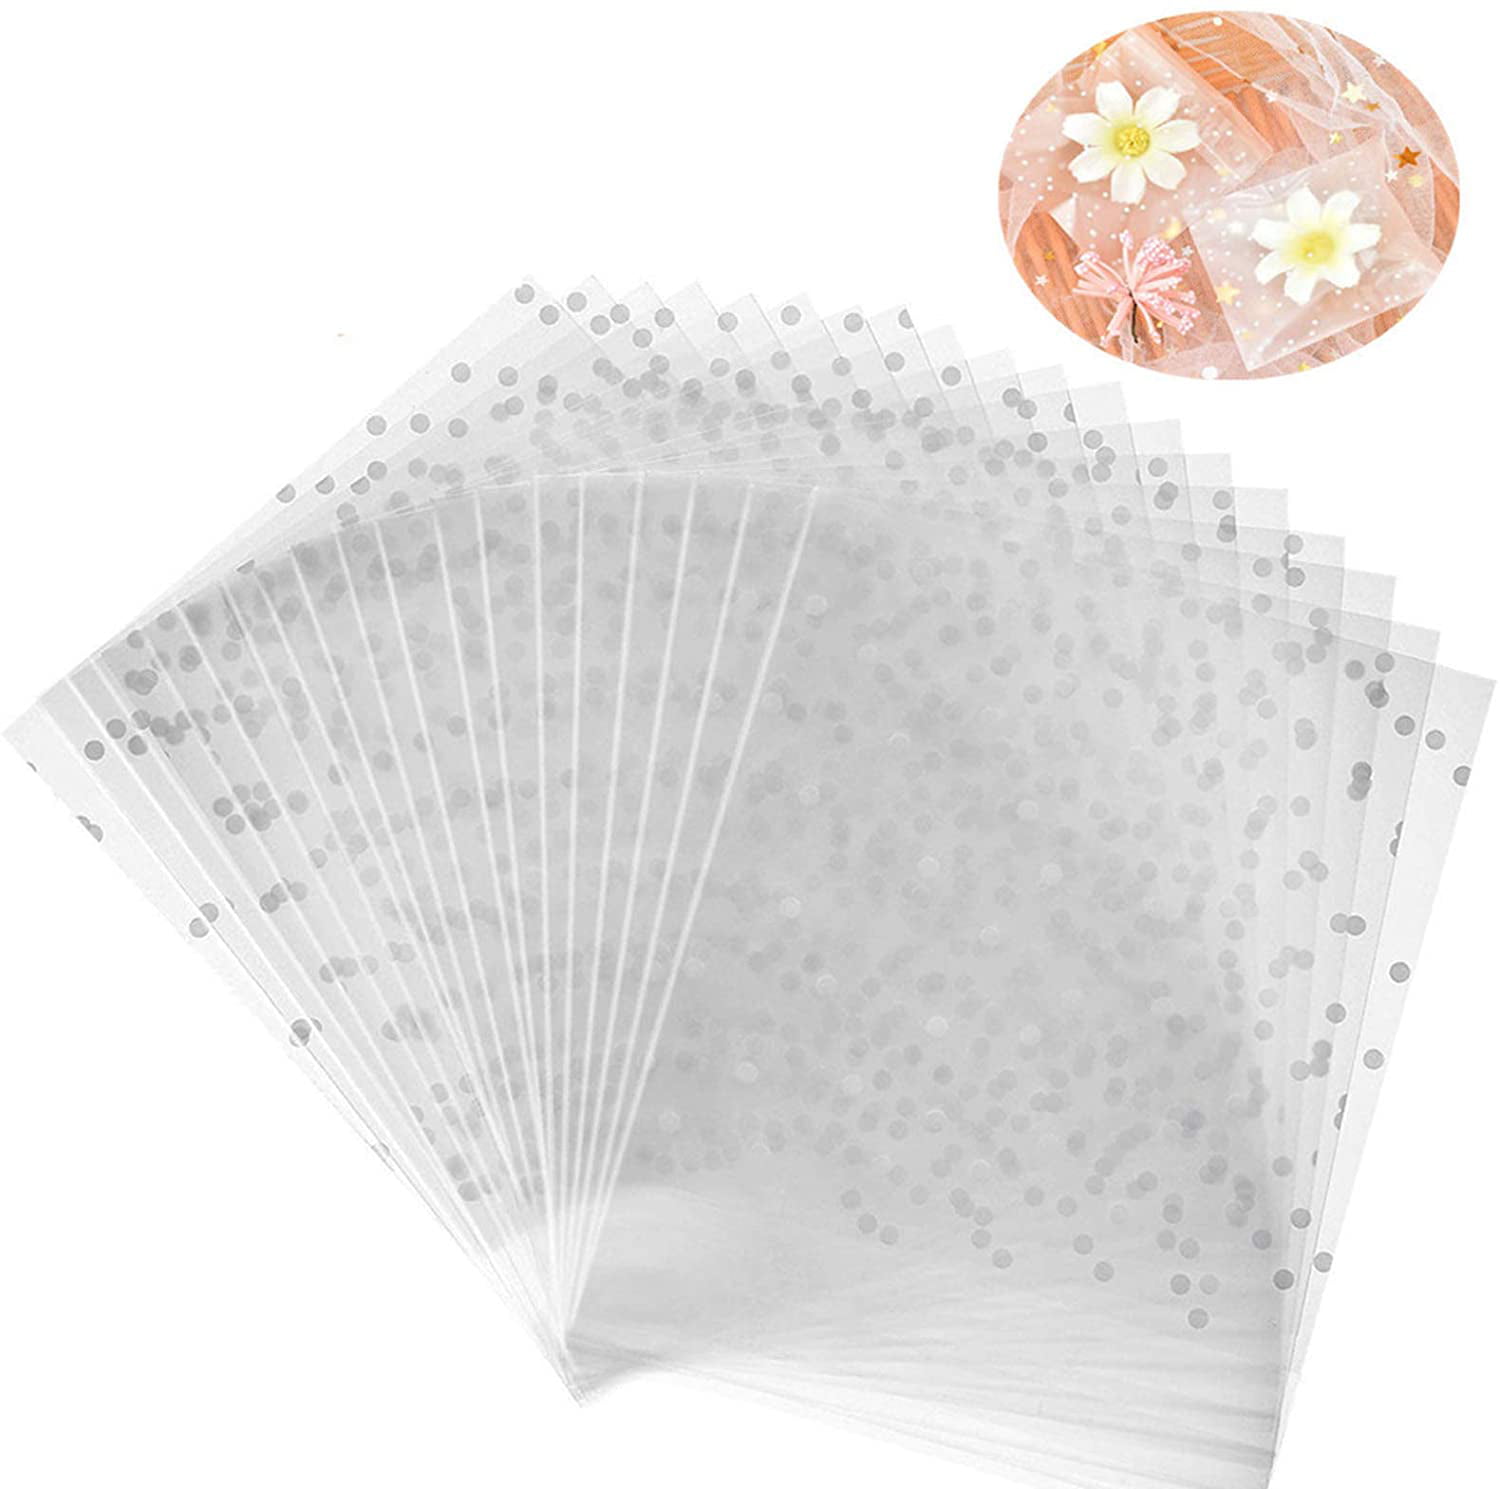 Supplies Transparent Package Self Adhesive Pocket Plastic Candy Bag Seal Pouch